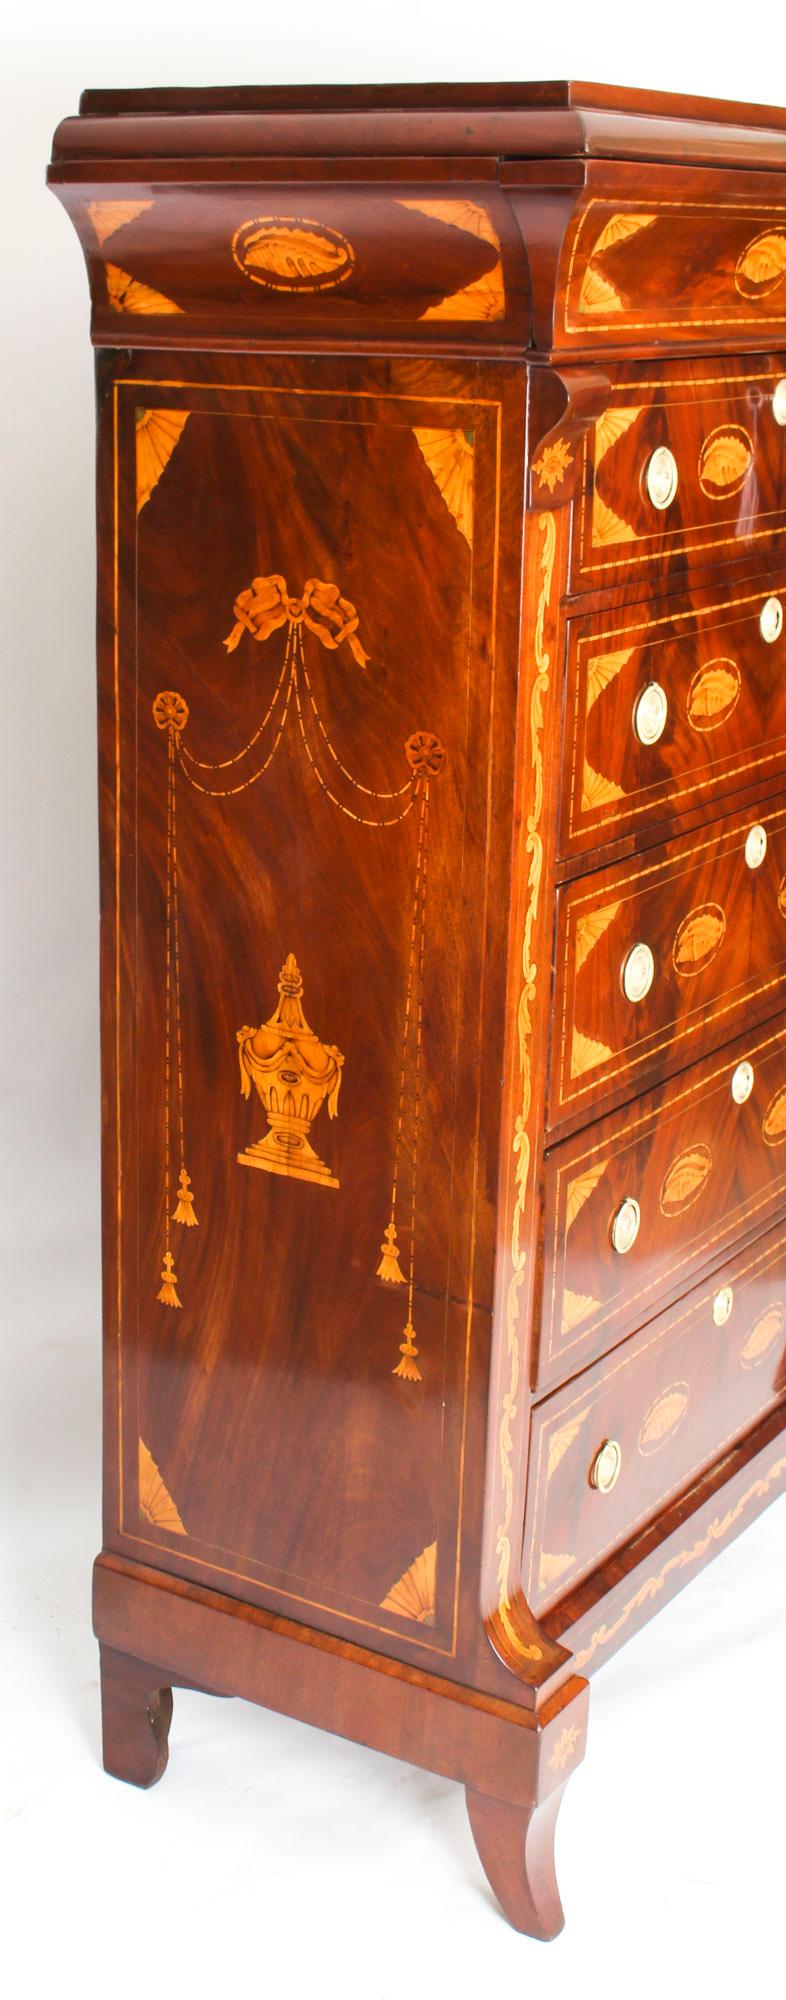 Antique Dutch Marquetry Walnut Seven Drawer Chest, Early 19th Century For Sale 6